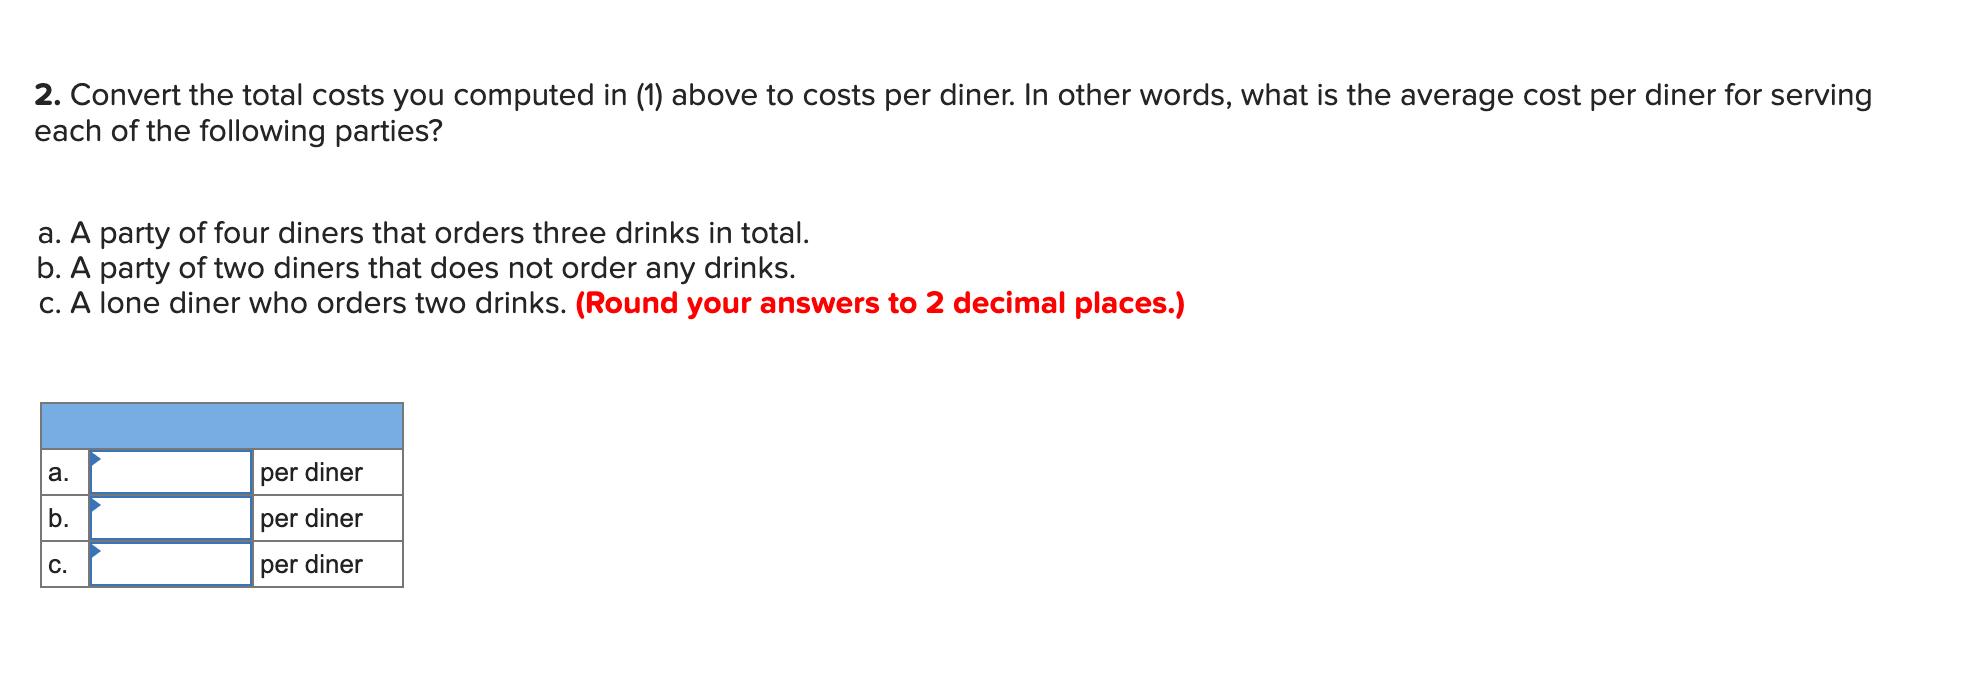 2. Convert the total costs you computed in (1) above to costs per diner. In other words, what is the average cost per diner f